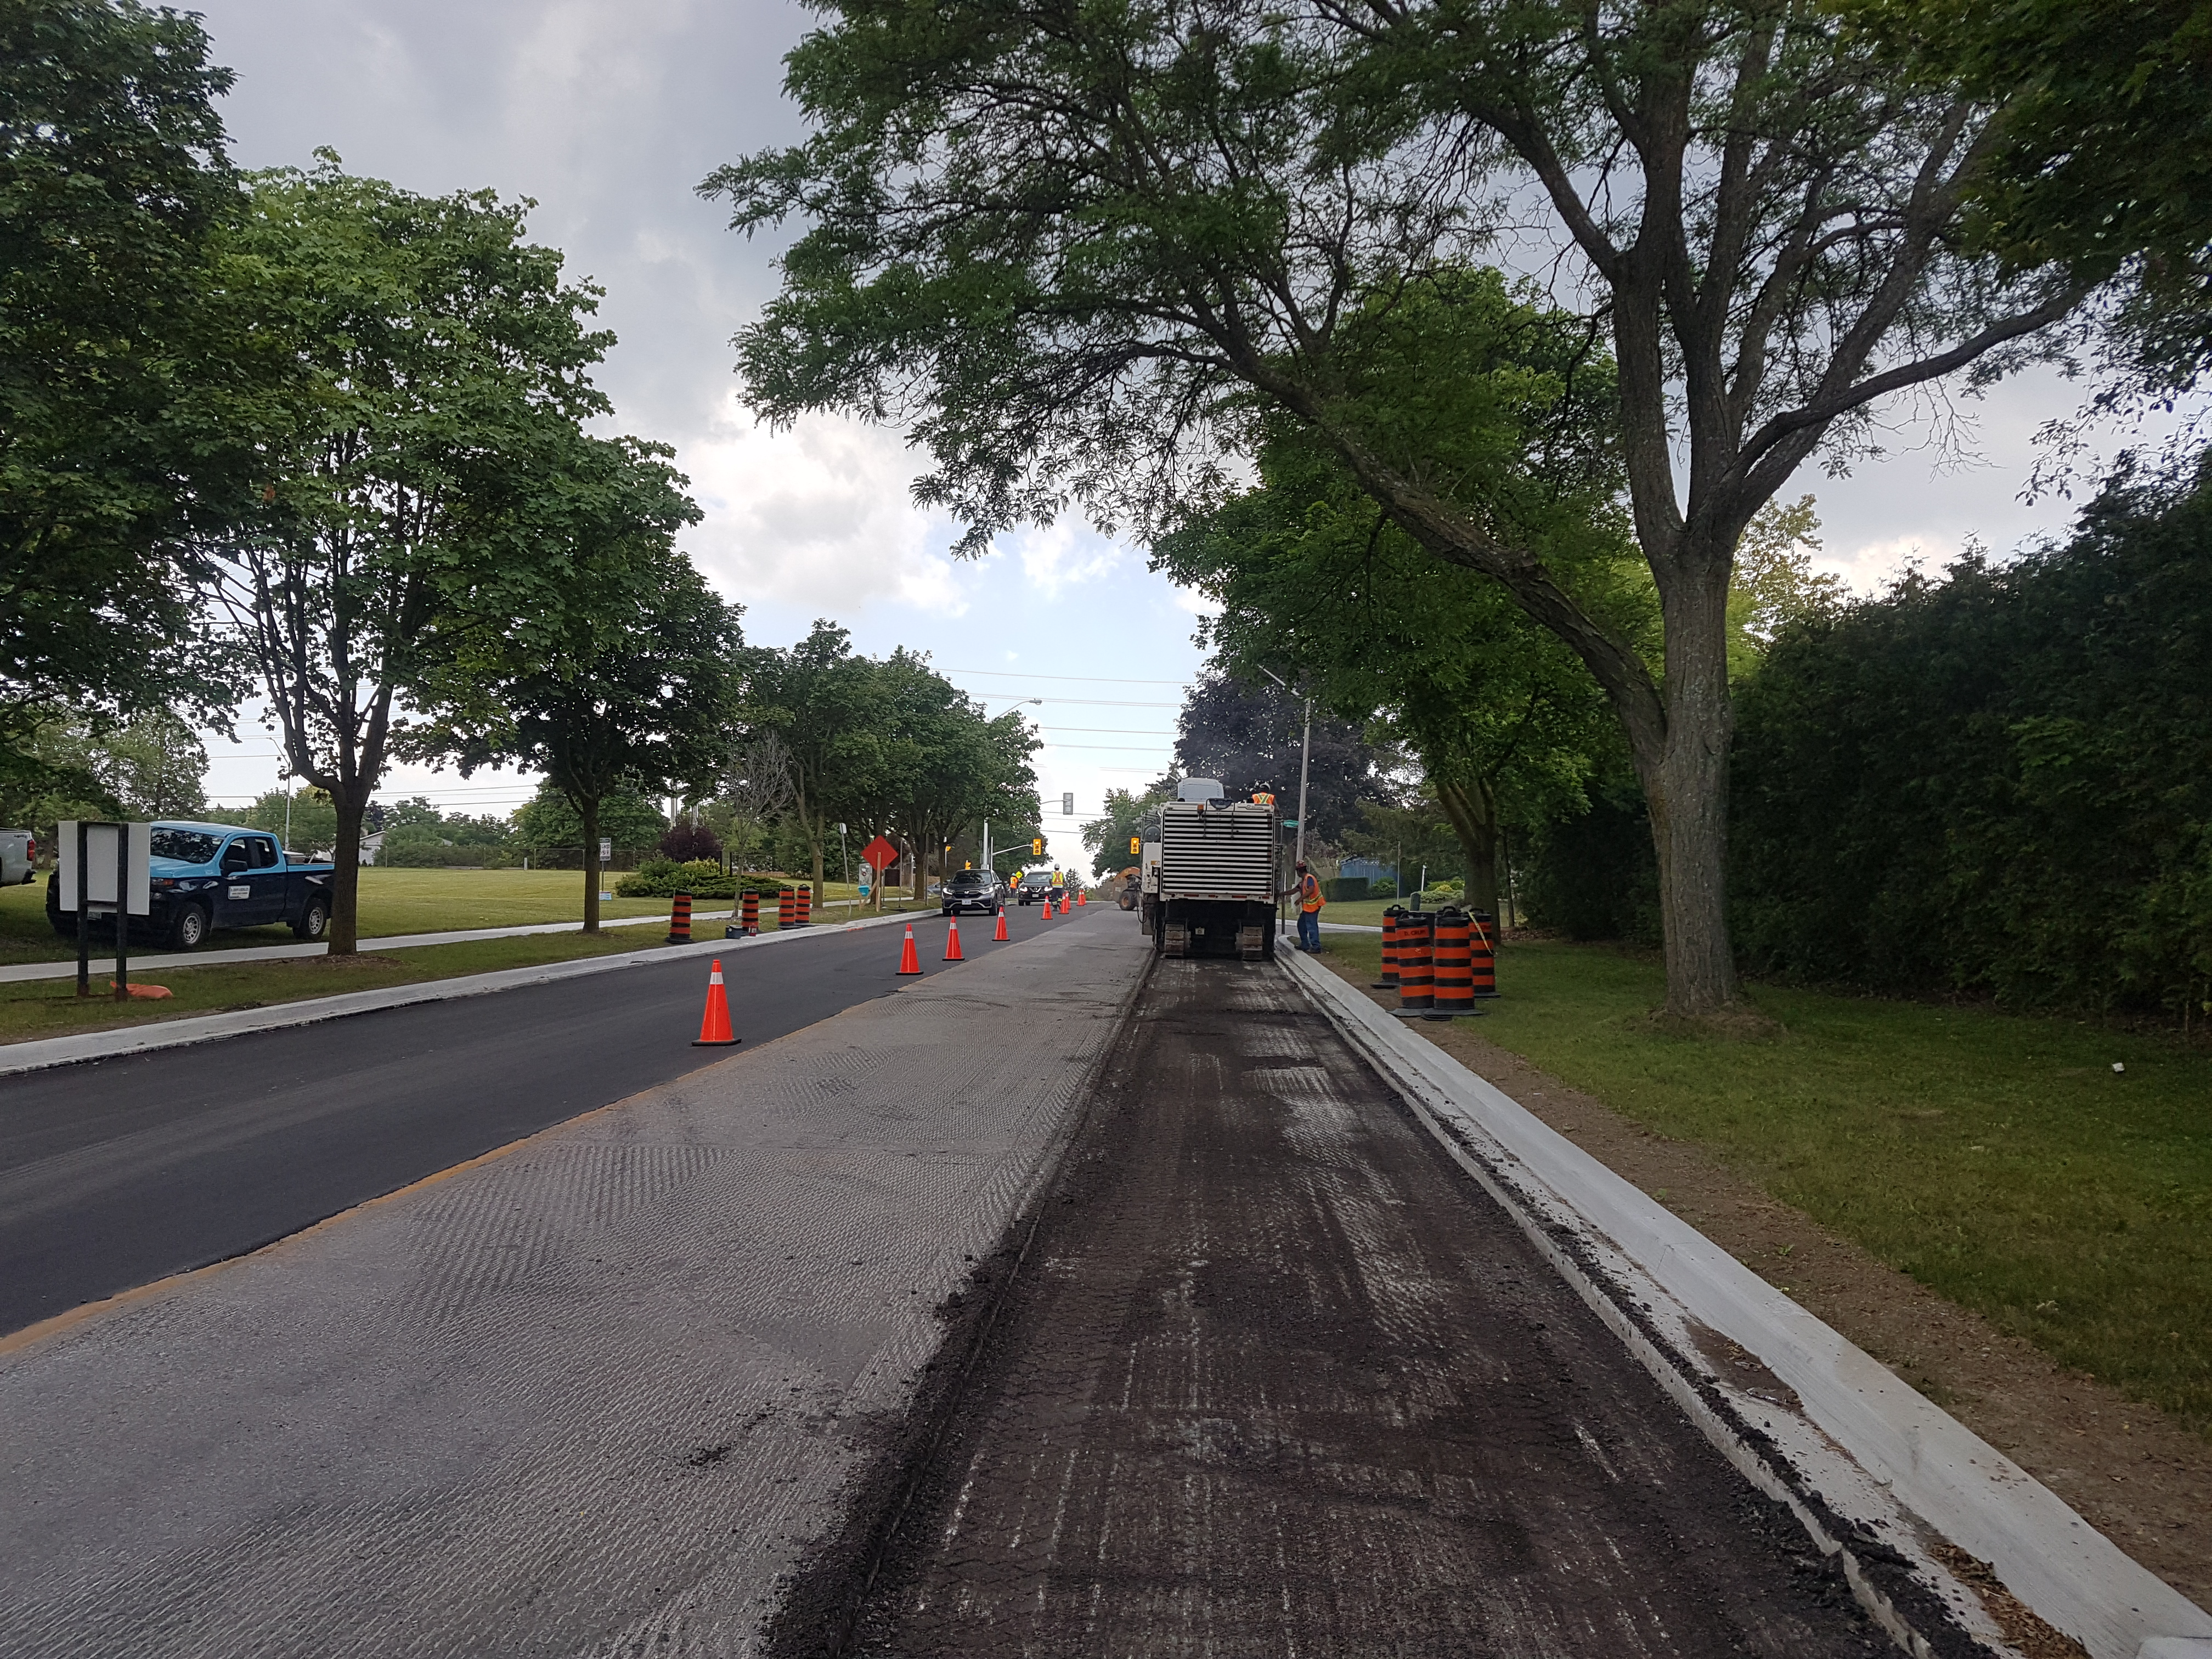 The City of Markham has invested in upgrades to local roads. 